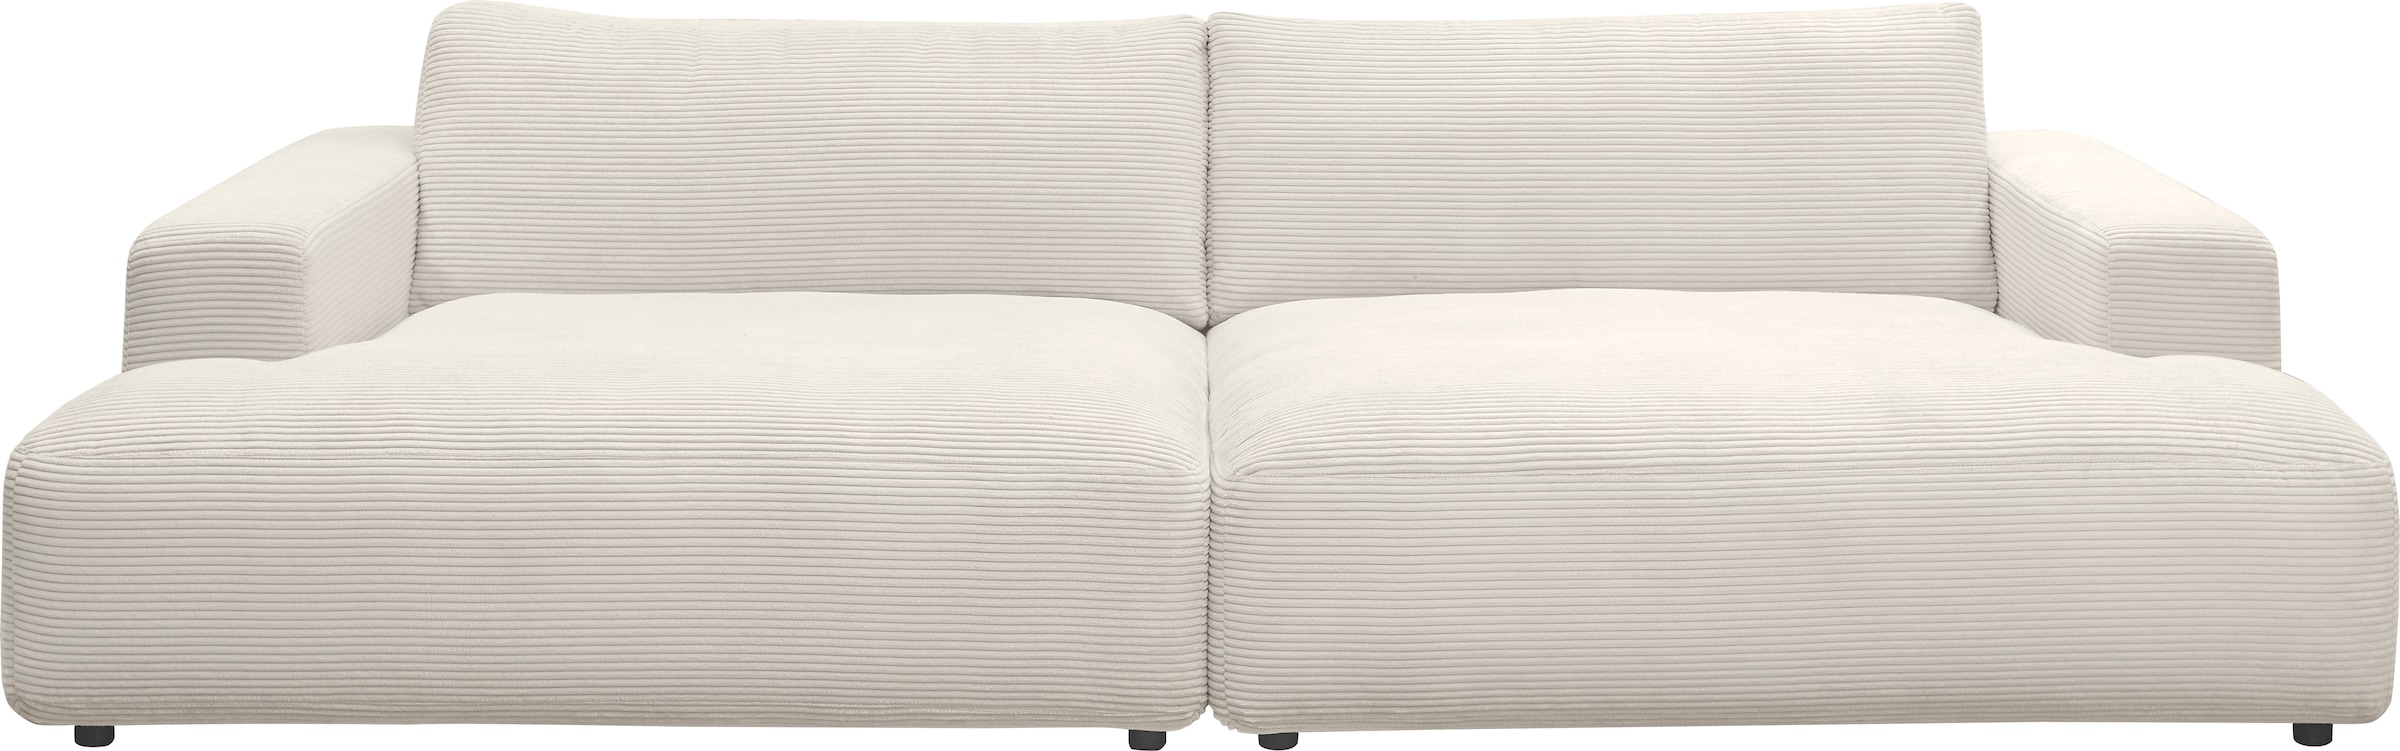 OTTO by Online cm Breite Cord-Bezug, »Lucia«, Shop GALLERY Loungesofa M Musterring 292 branded